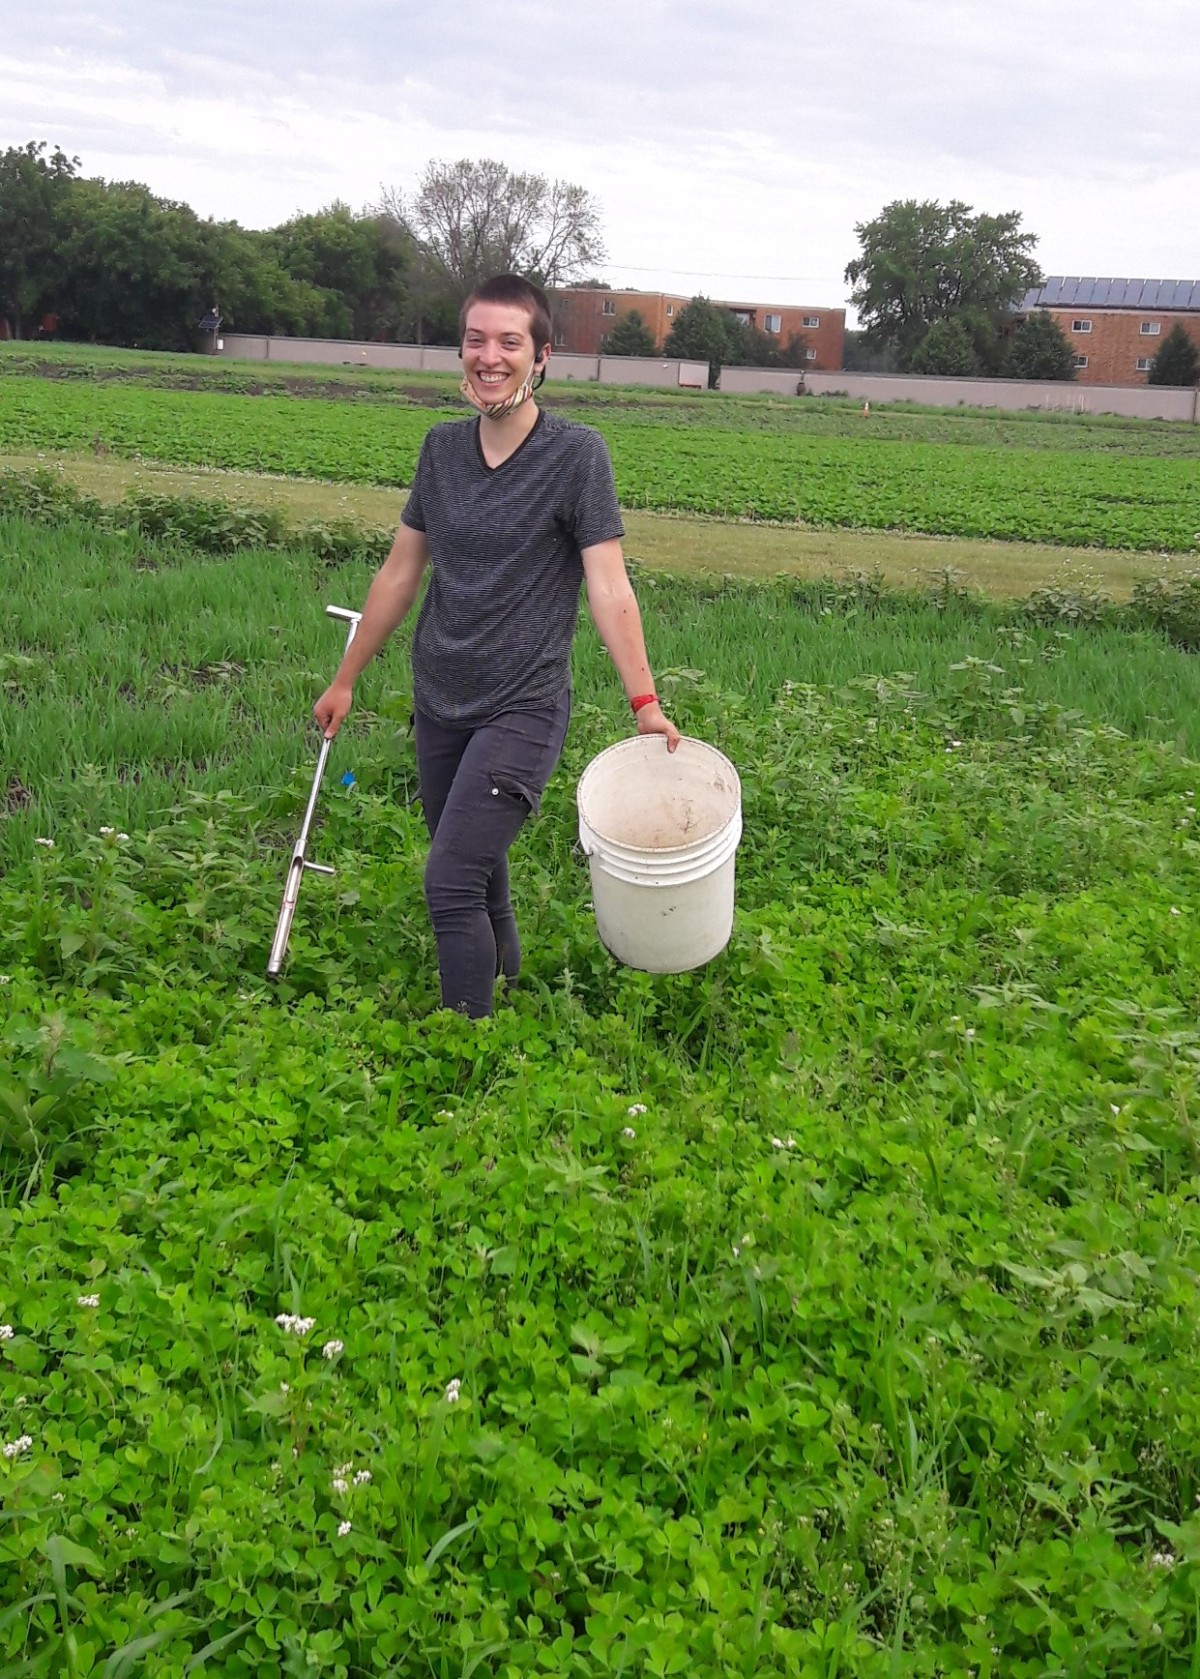 Madi standing in a plot of clover holding a soil probe and a bucket